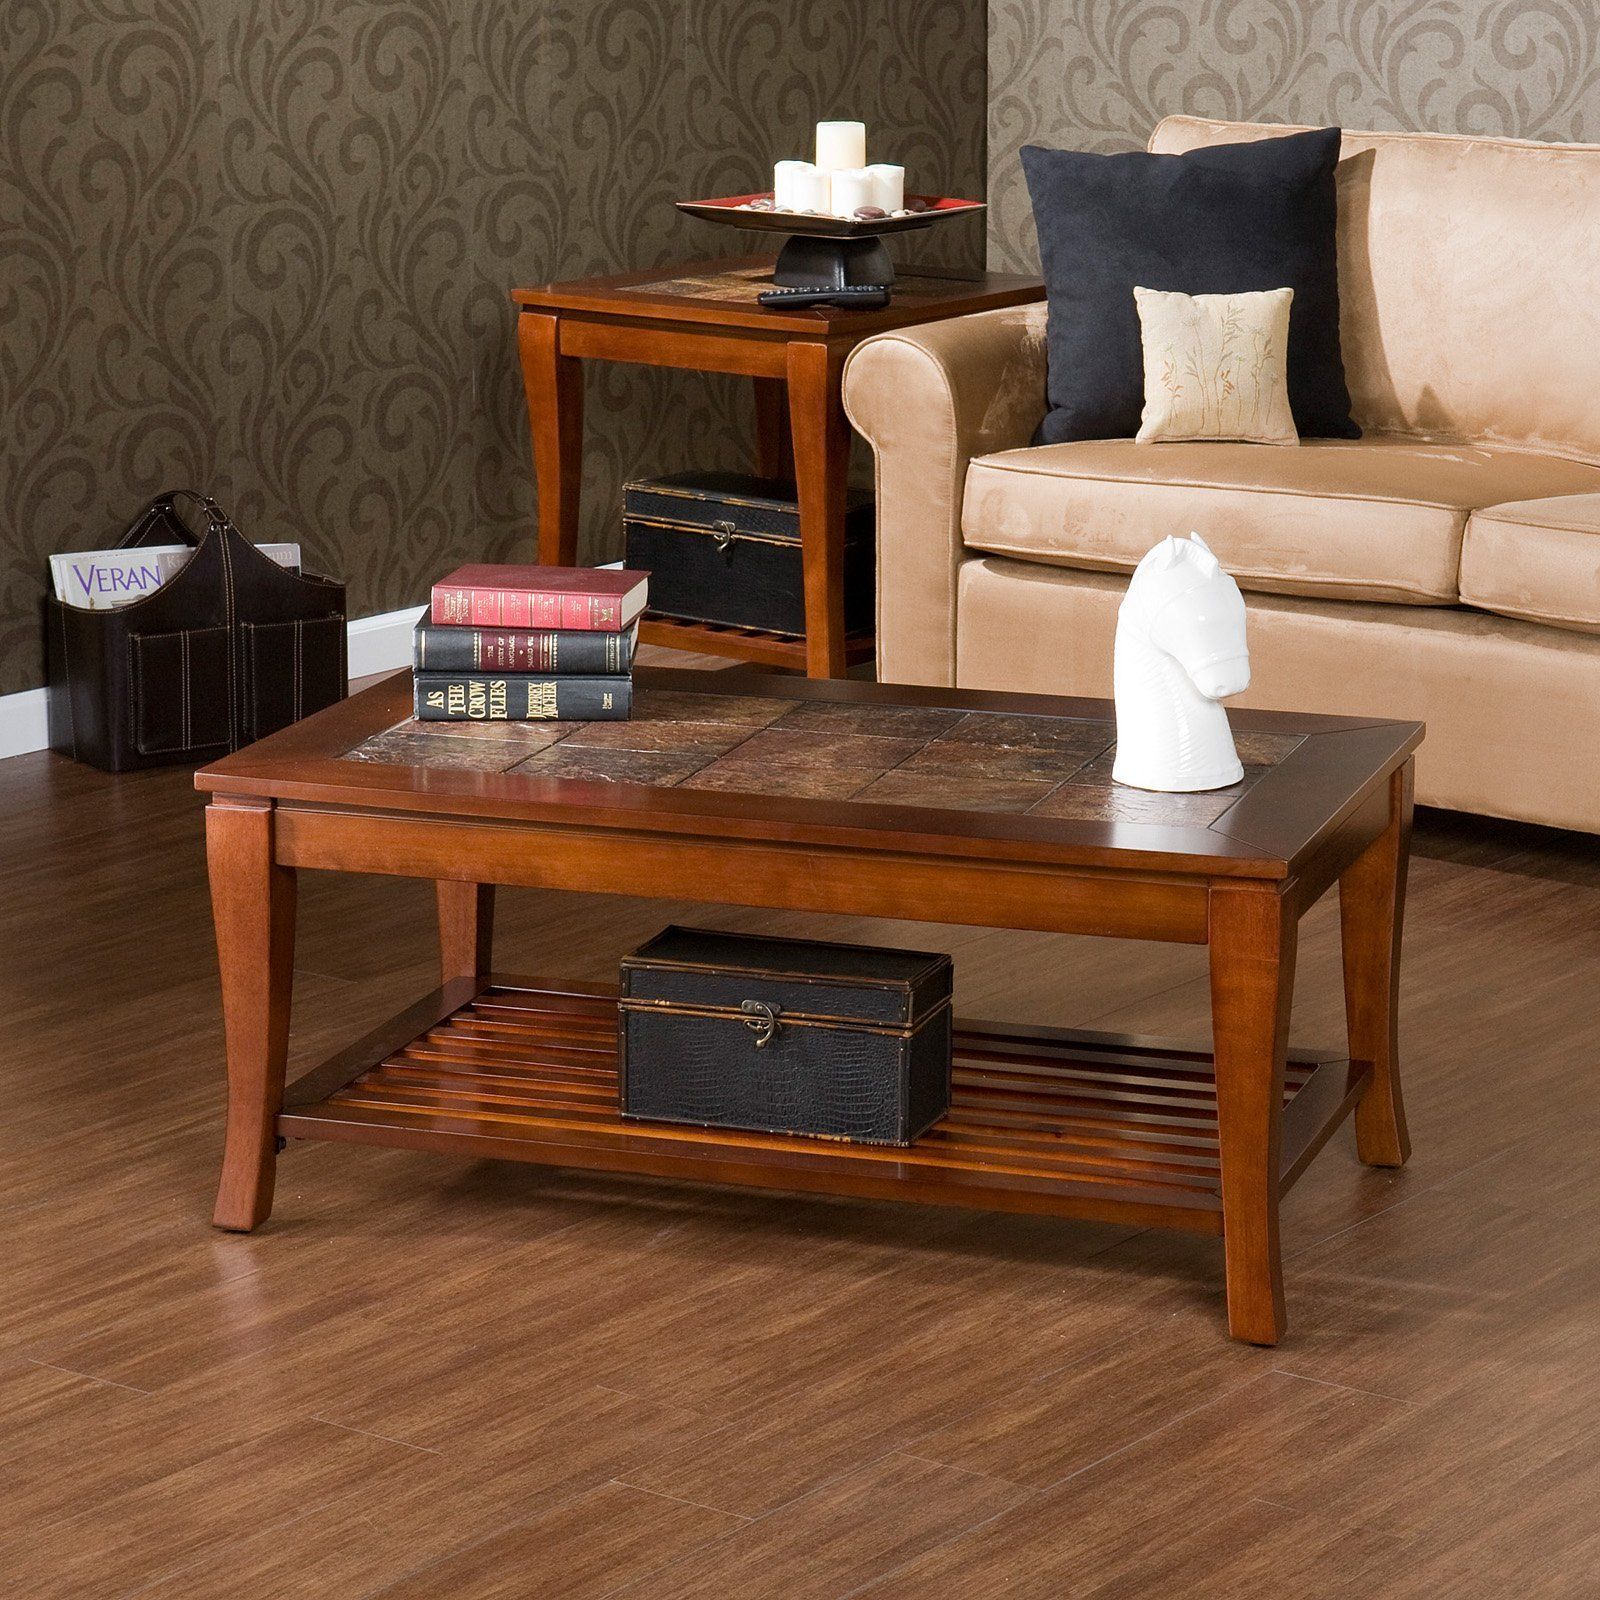 Southern Enterprises Cambria Slate Coffee Table – Brown Cherry | Coffee Inside Southern Enterprises Larksmill Coffee Tables (View 17 of 20)